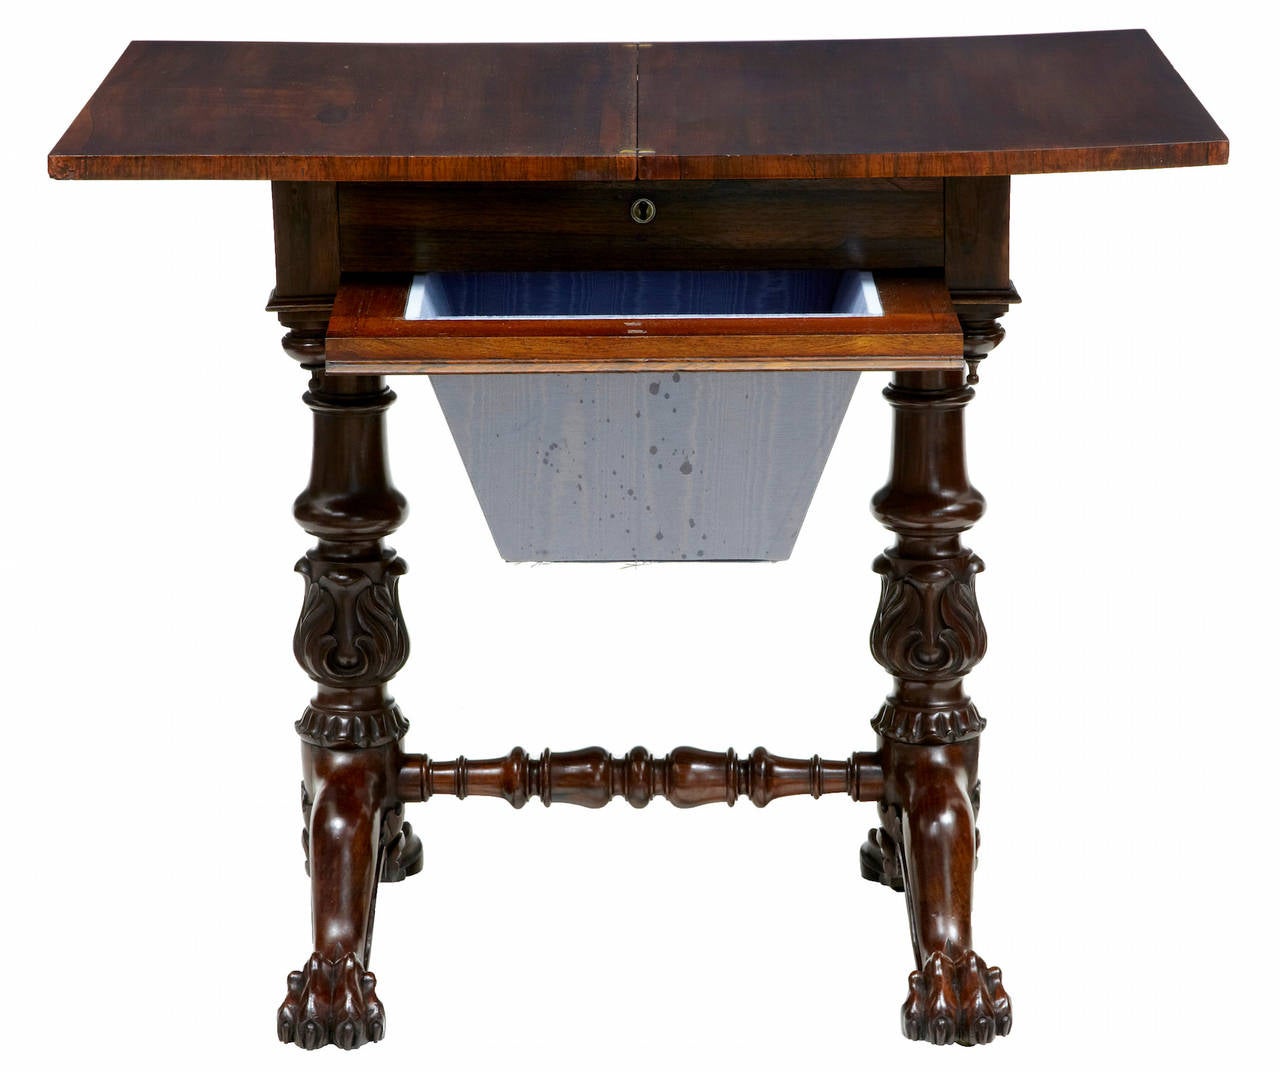 Beautiful rosewood work table, circa 1830. 

Stunning large carved base, with carved foliage stems. Single drawer now minus the partitions. Pull-out compartment below. Flip-top rotates and opens to form a larger surface.

Standing on lion paws